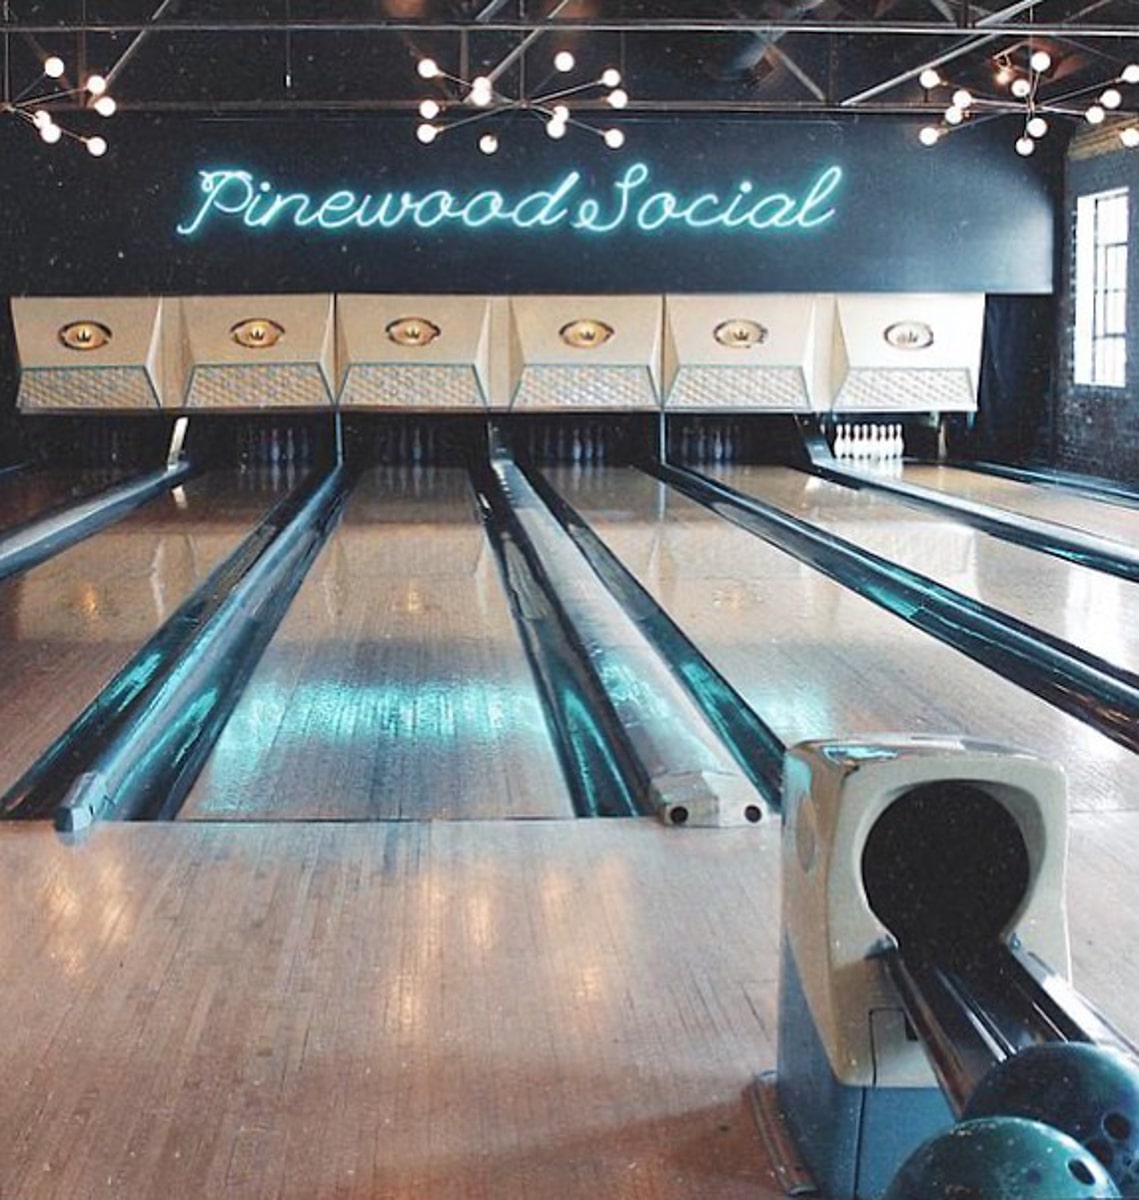 pinewood social bowling lanes with neon sign and wooden floors